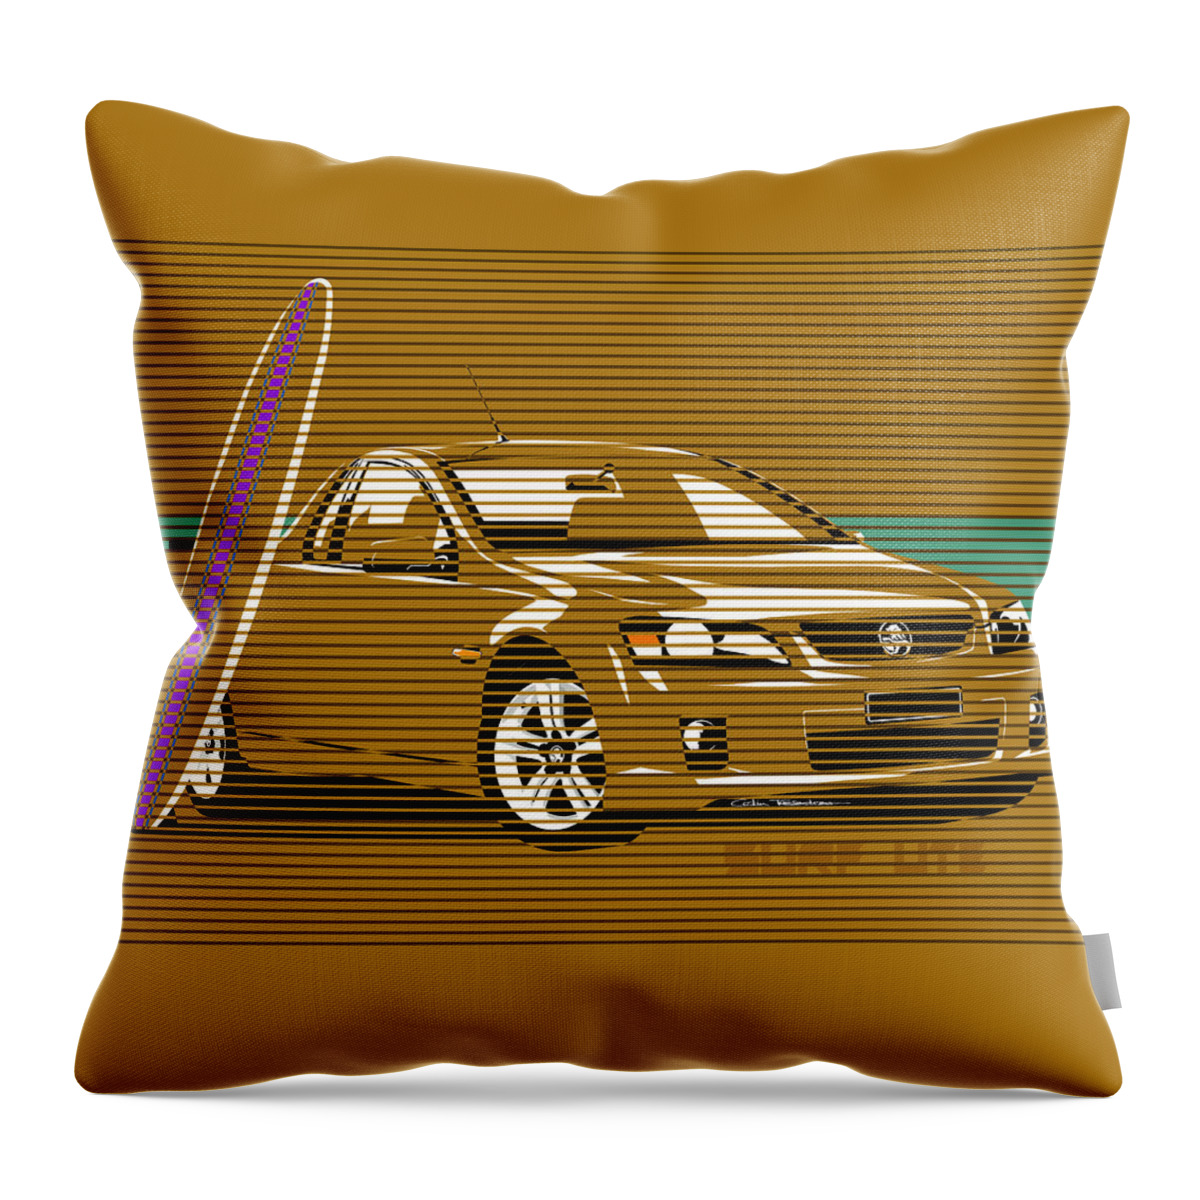 Holden Throw Pillow featuring the digital art Surf Ute by Colin Tresadern